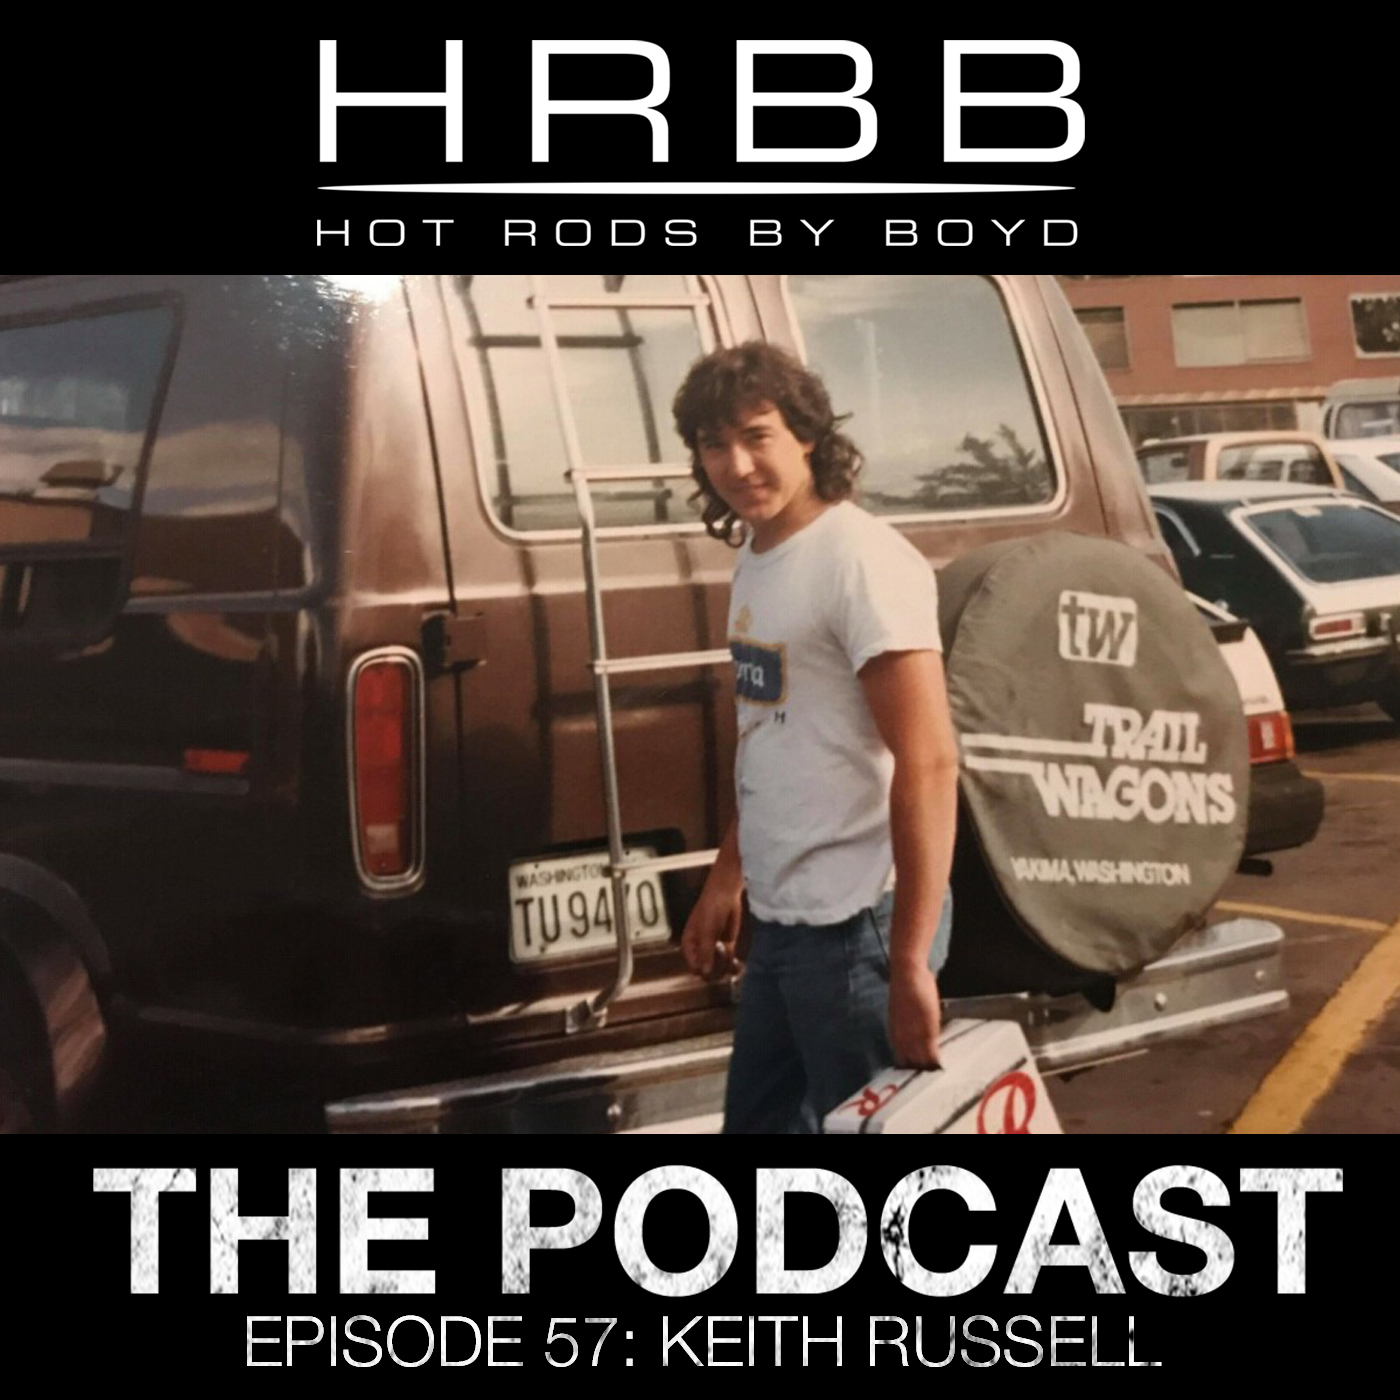 HRBB Podcast Ep 59 - Keith Russell